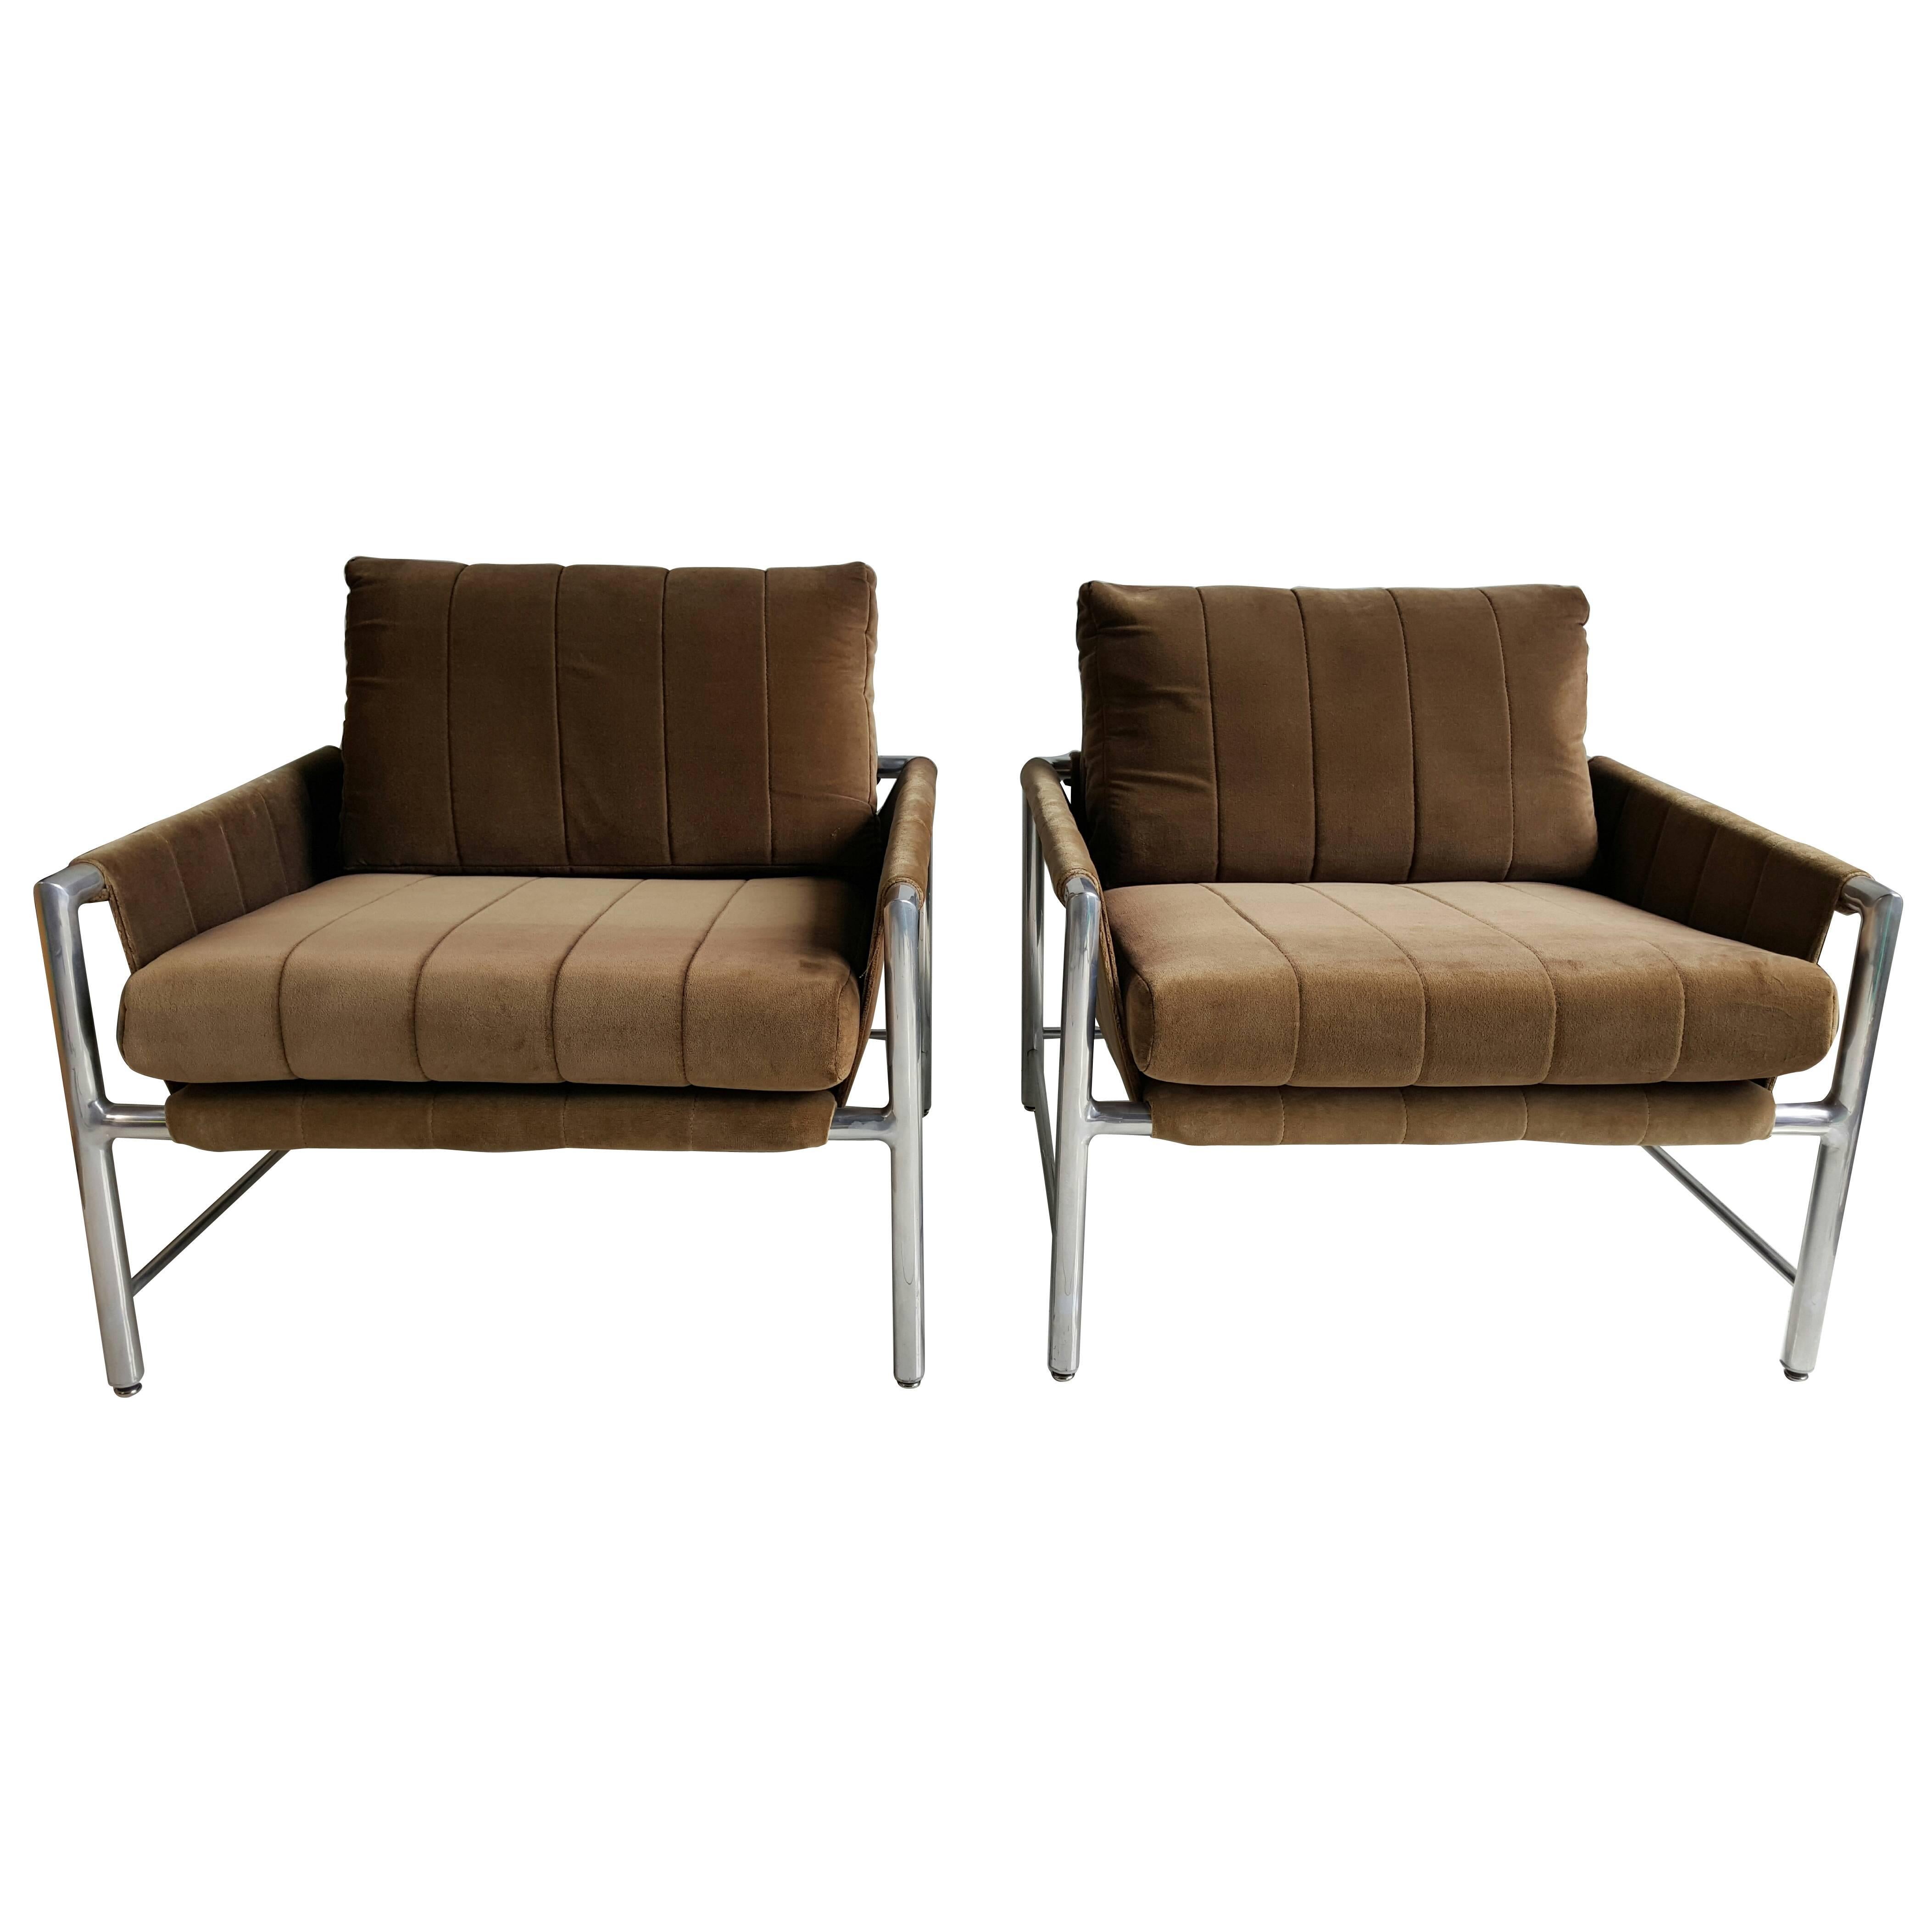 Pair of Extruded Aluminum and Velvet Sling Lounge Chairs by Founders For Sale